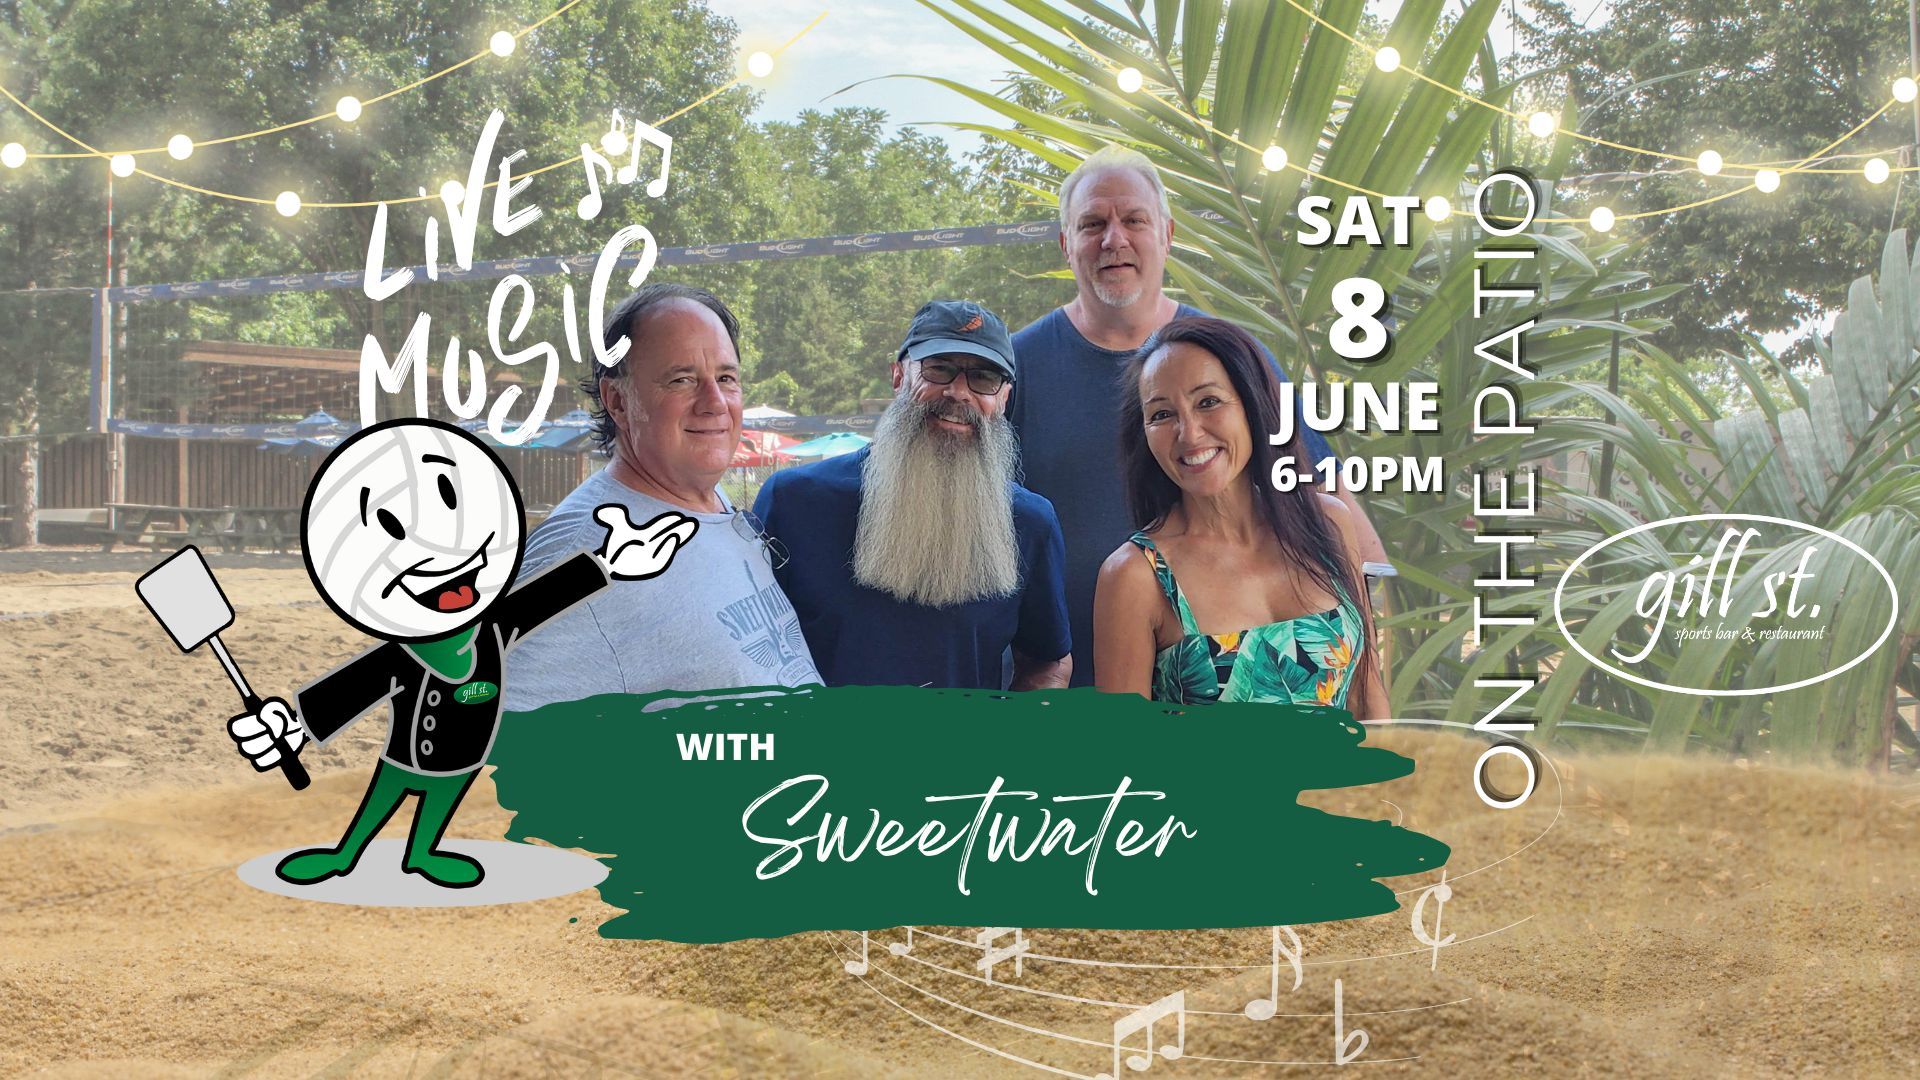 Live Music with Sweetwater